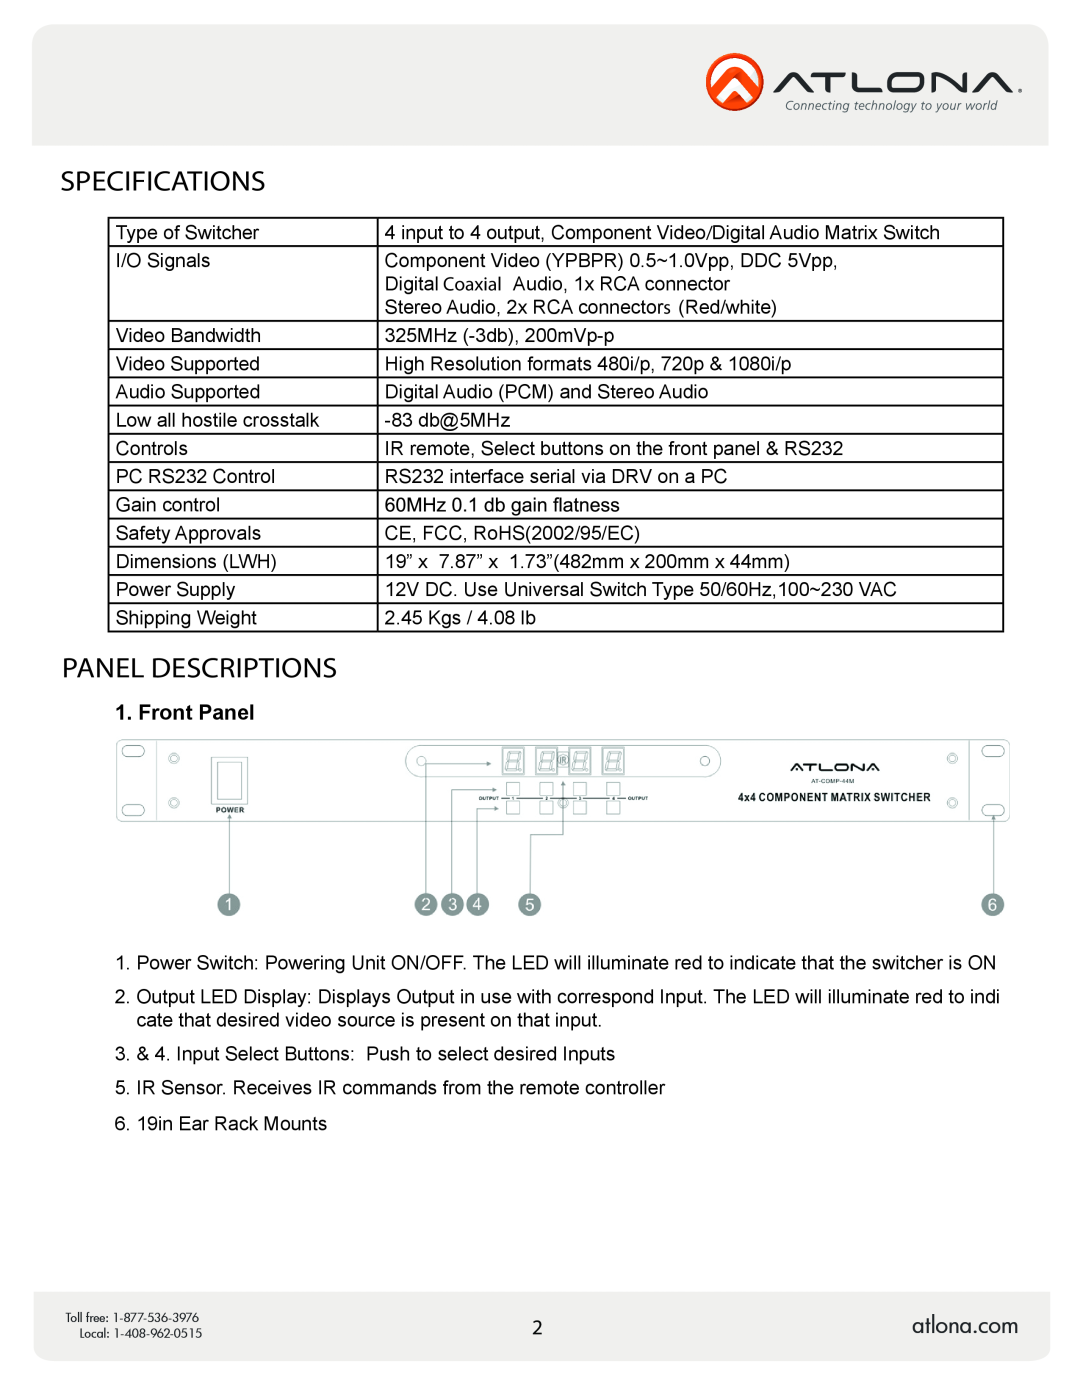 Atlona AT-COMP-44M user manual Specifications, Panel Descriptions, Front Panel 